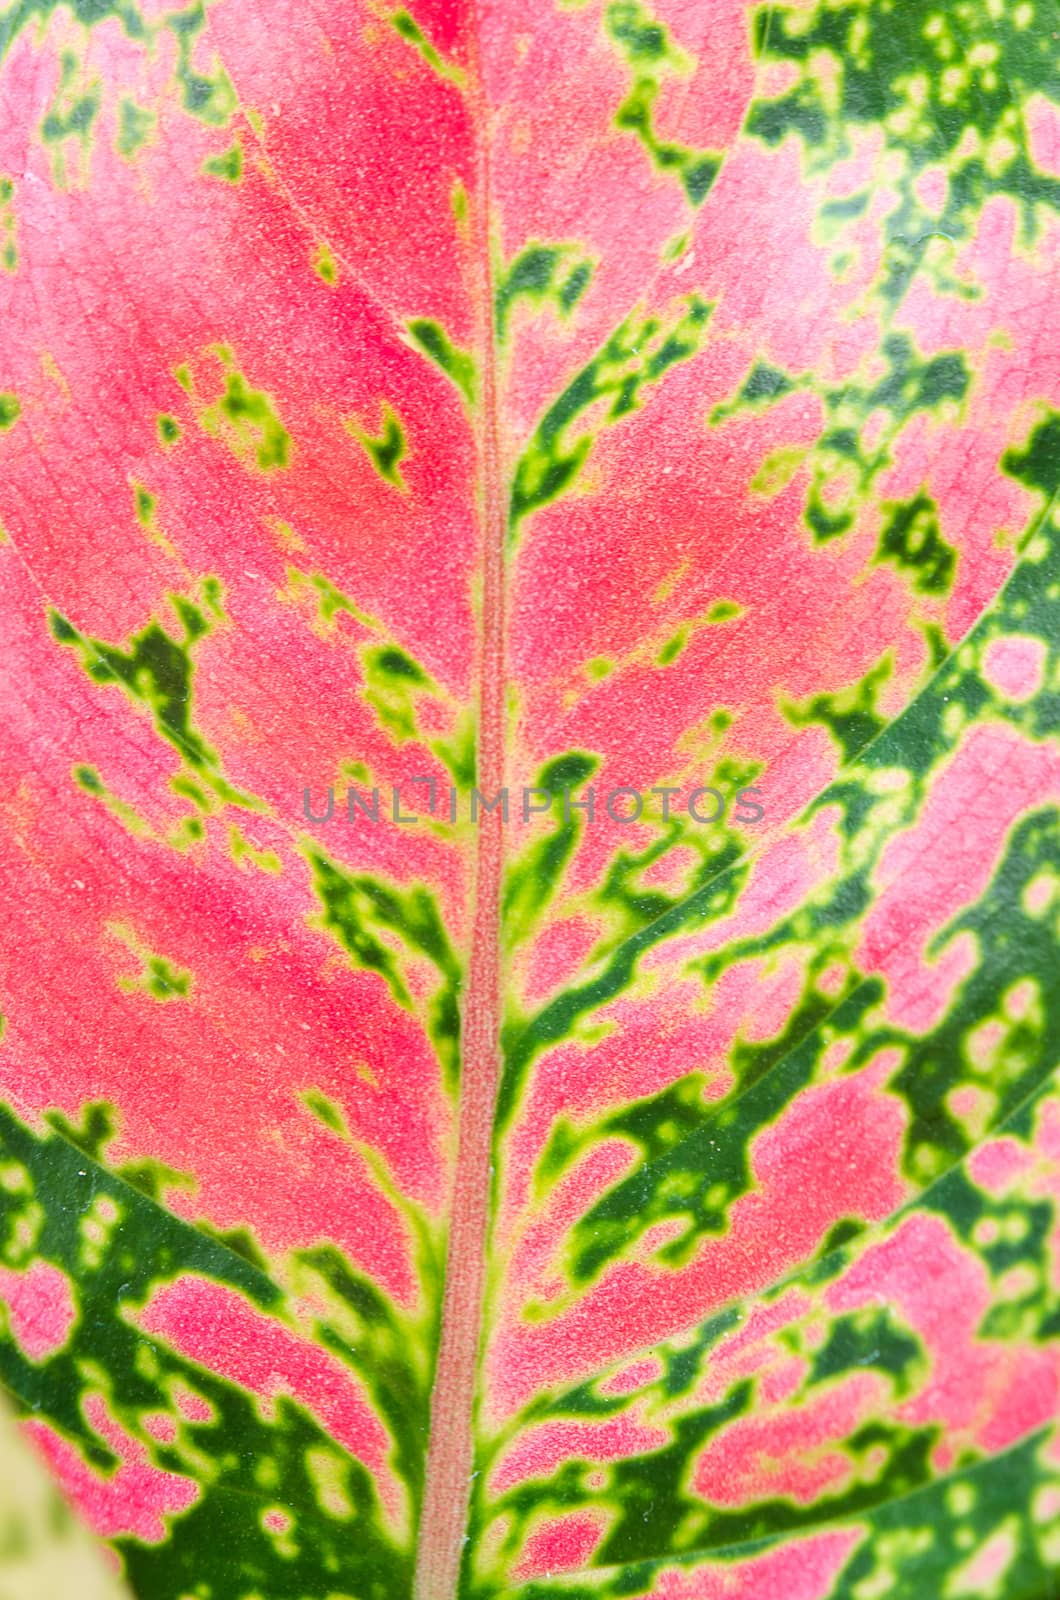 Leaf texture by aoo3771